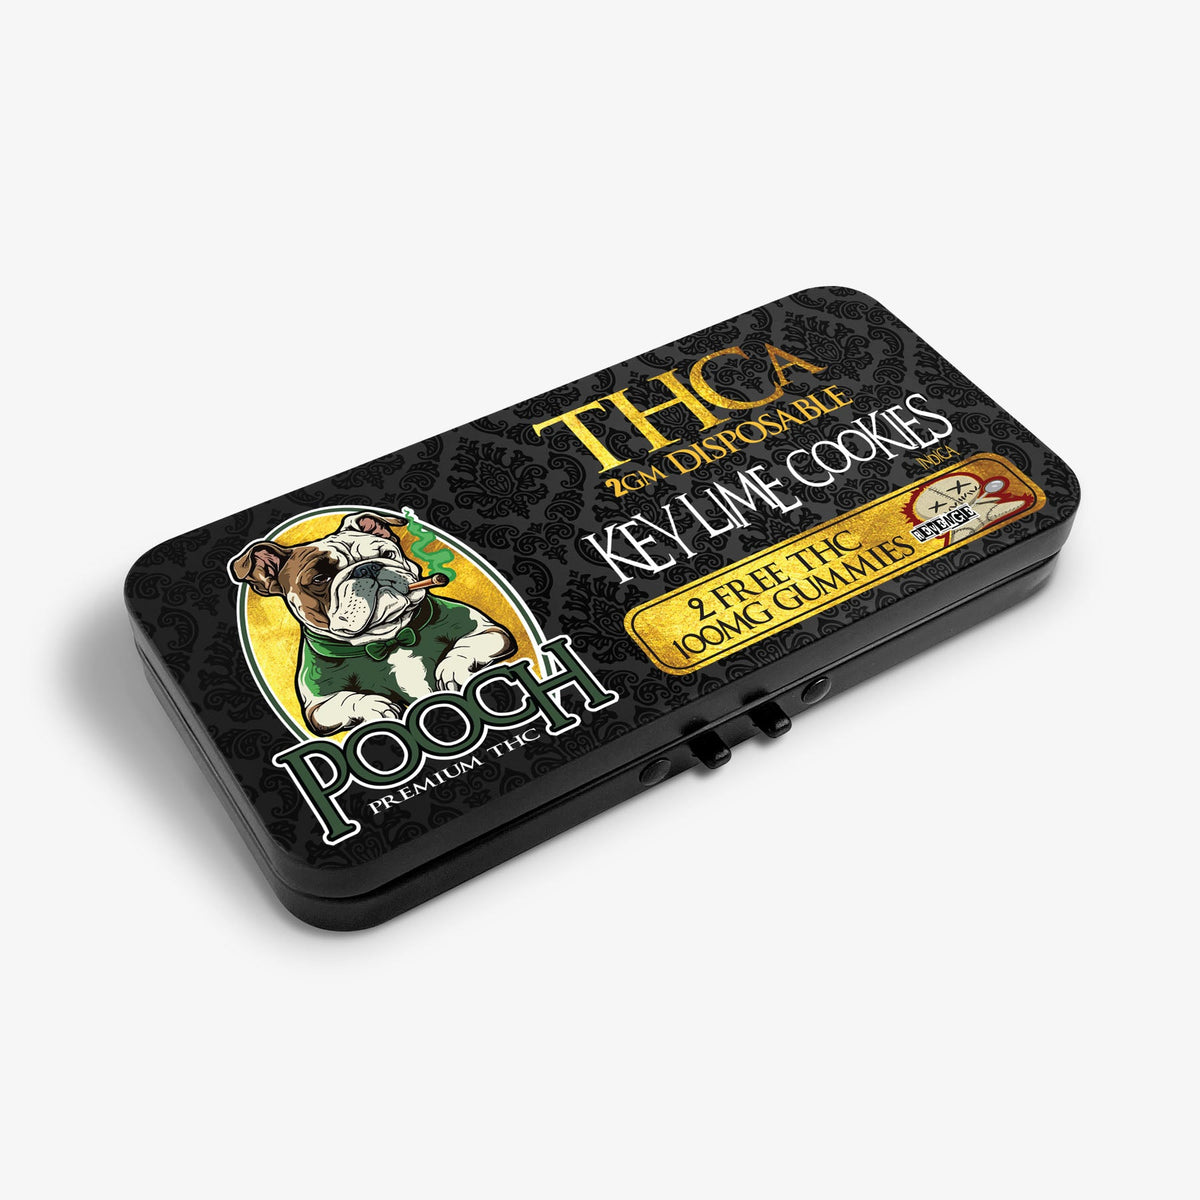 pooch thc-a disposable 2g key lime cookies revenge 100mg gummy